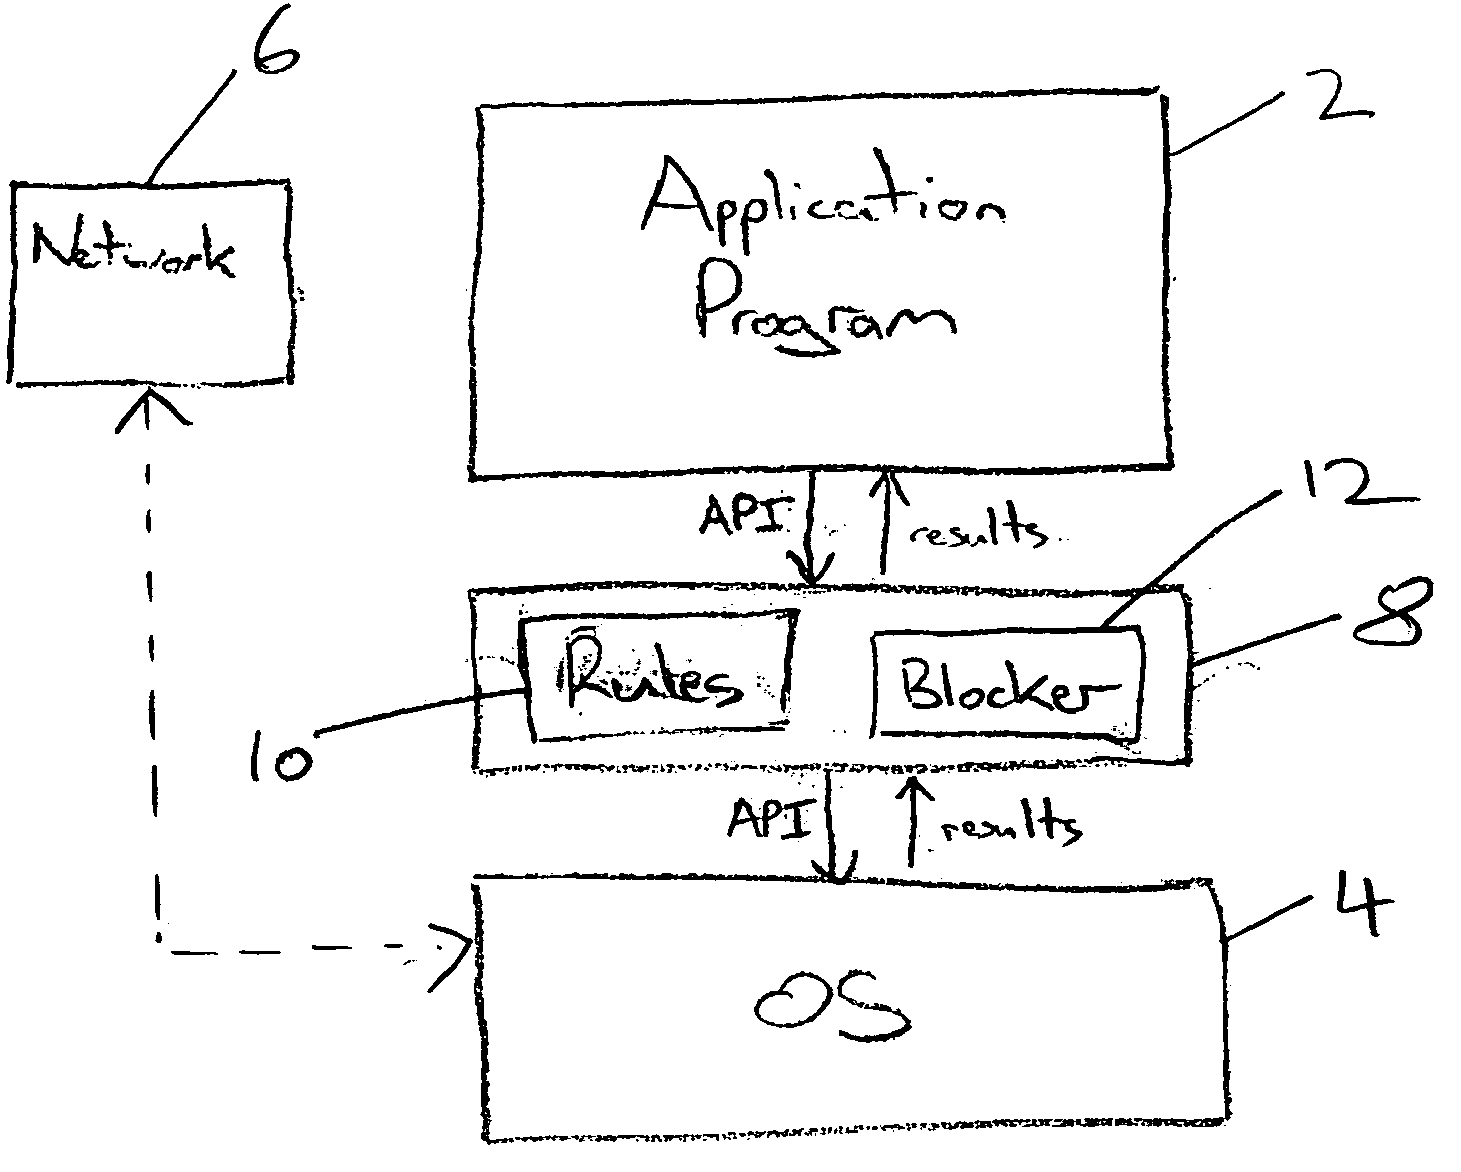 Detecting malicious computer program activity using external program calls with dynamic rule sets